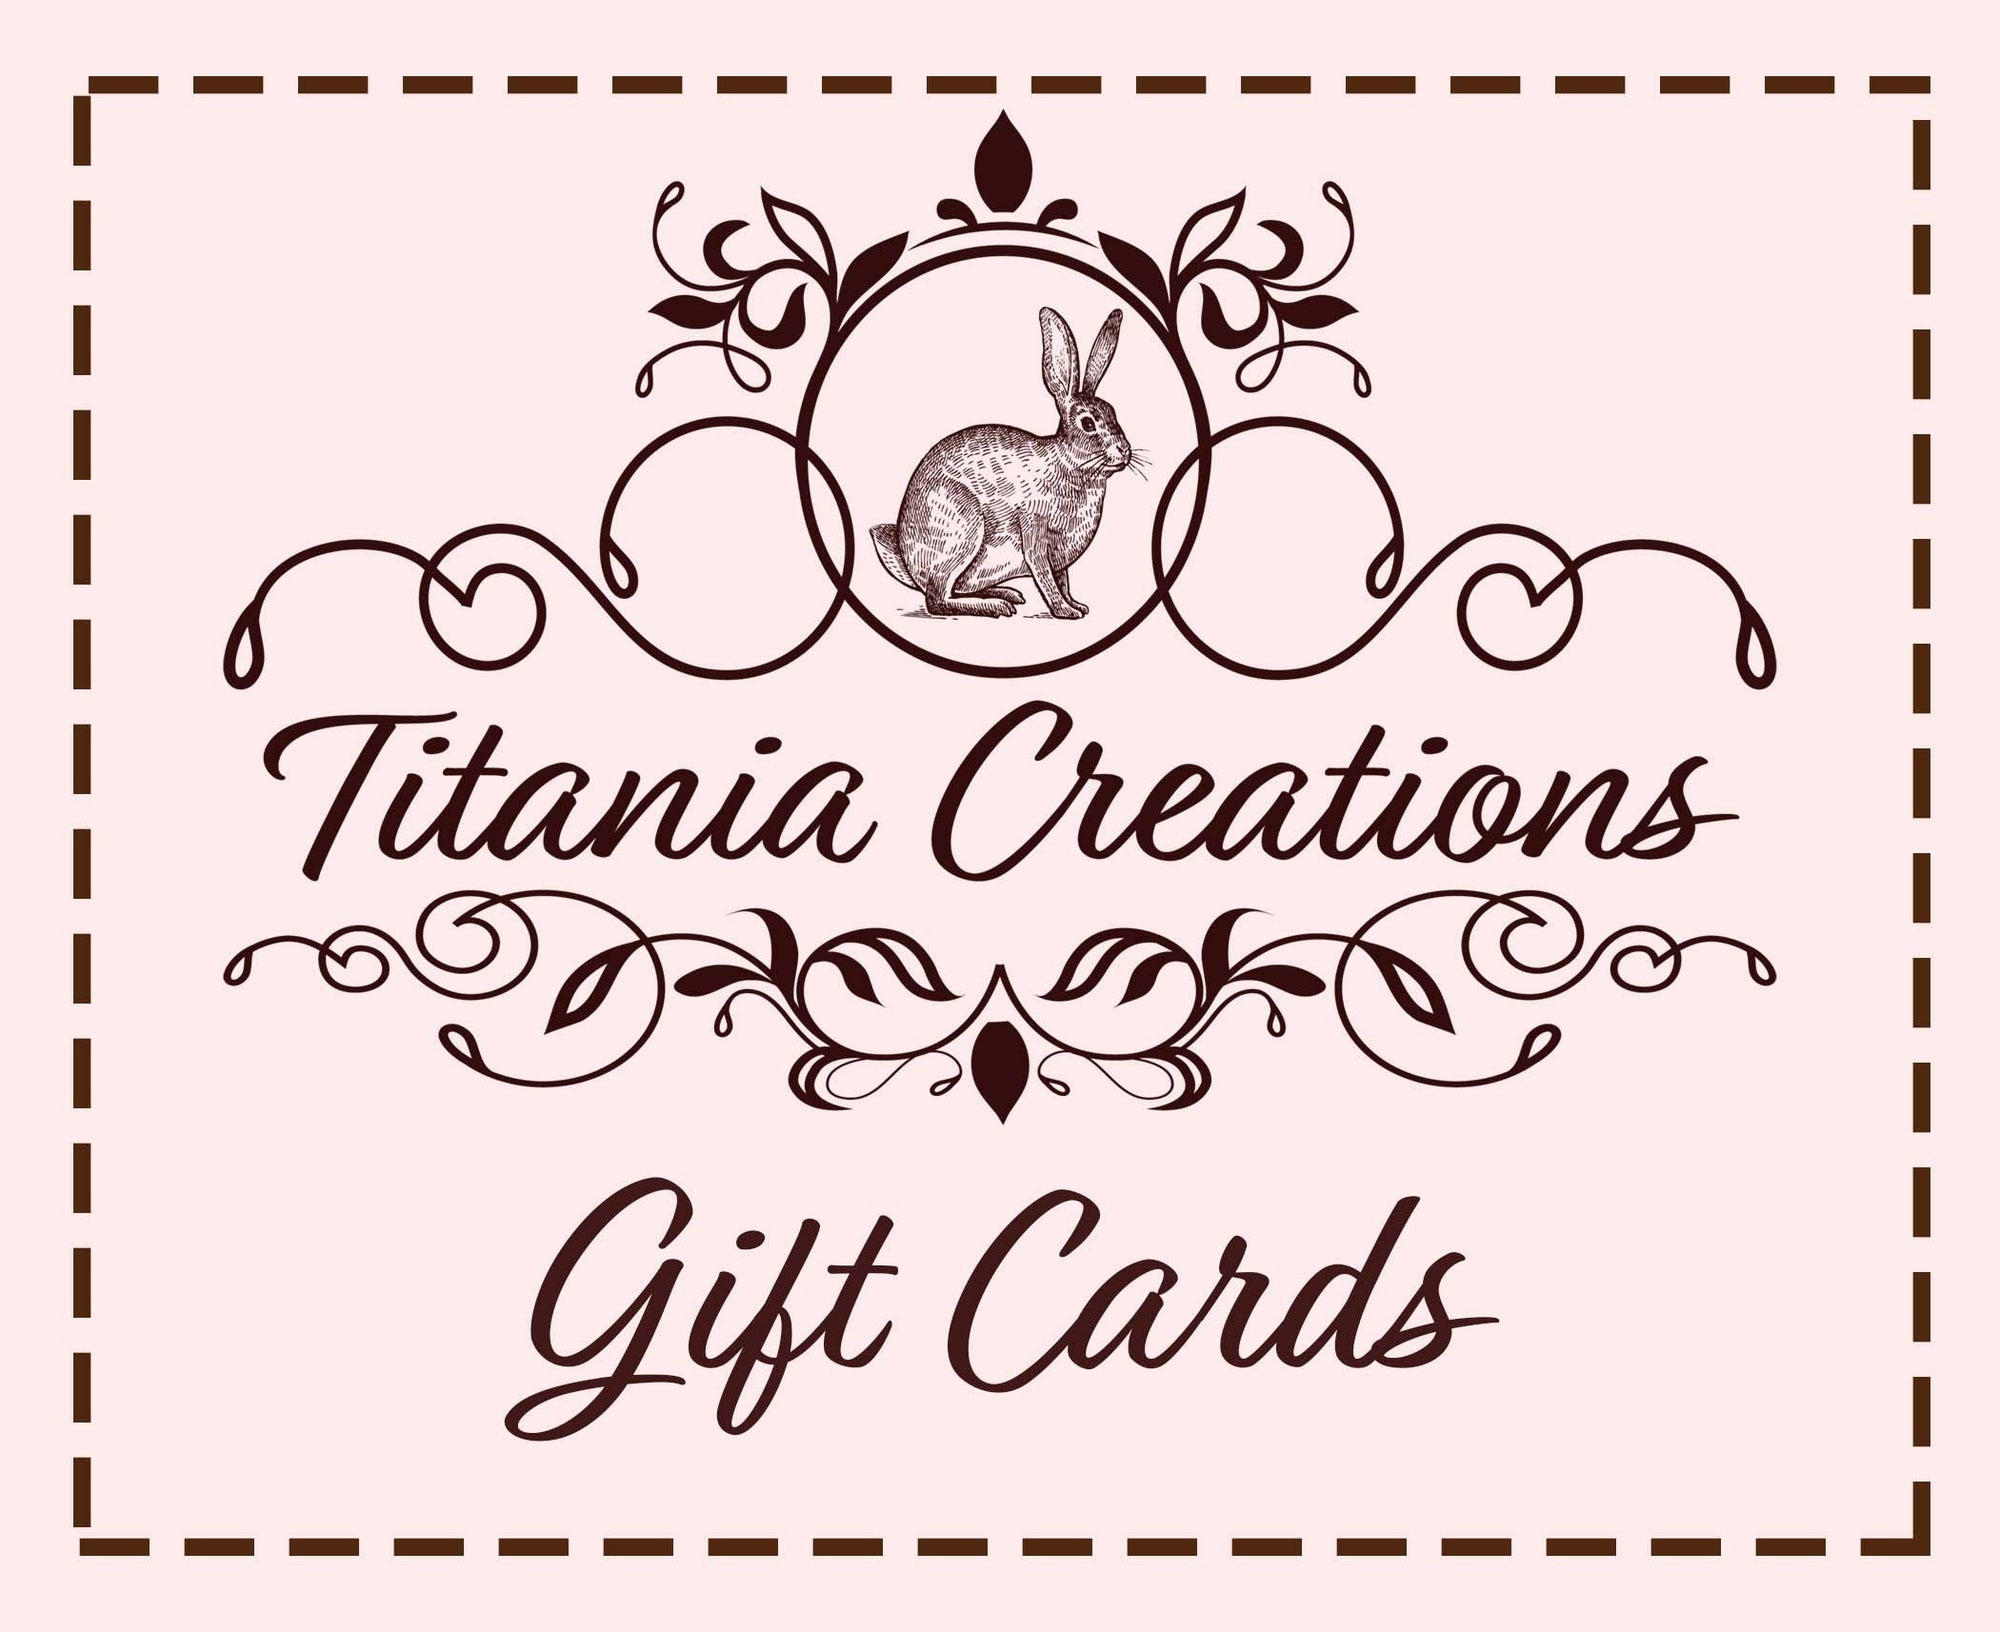 Gift Cards Card